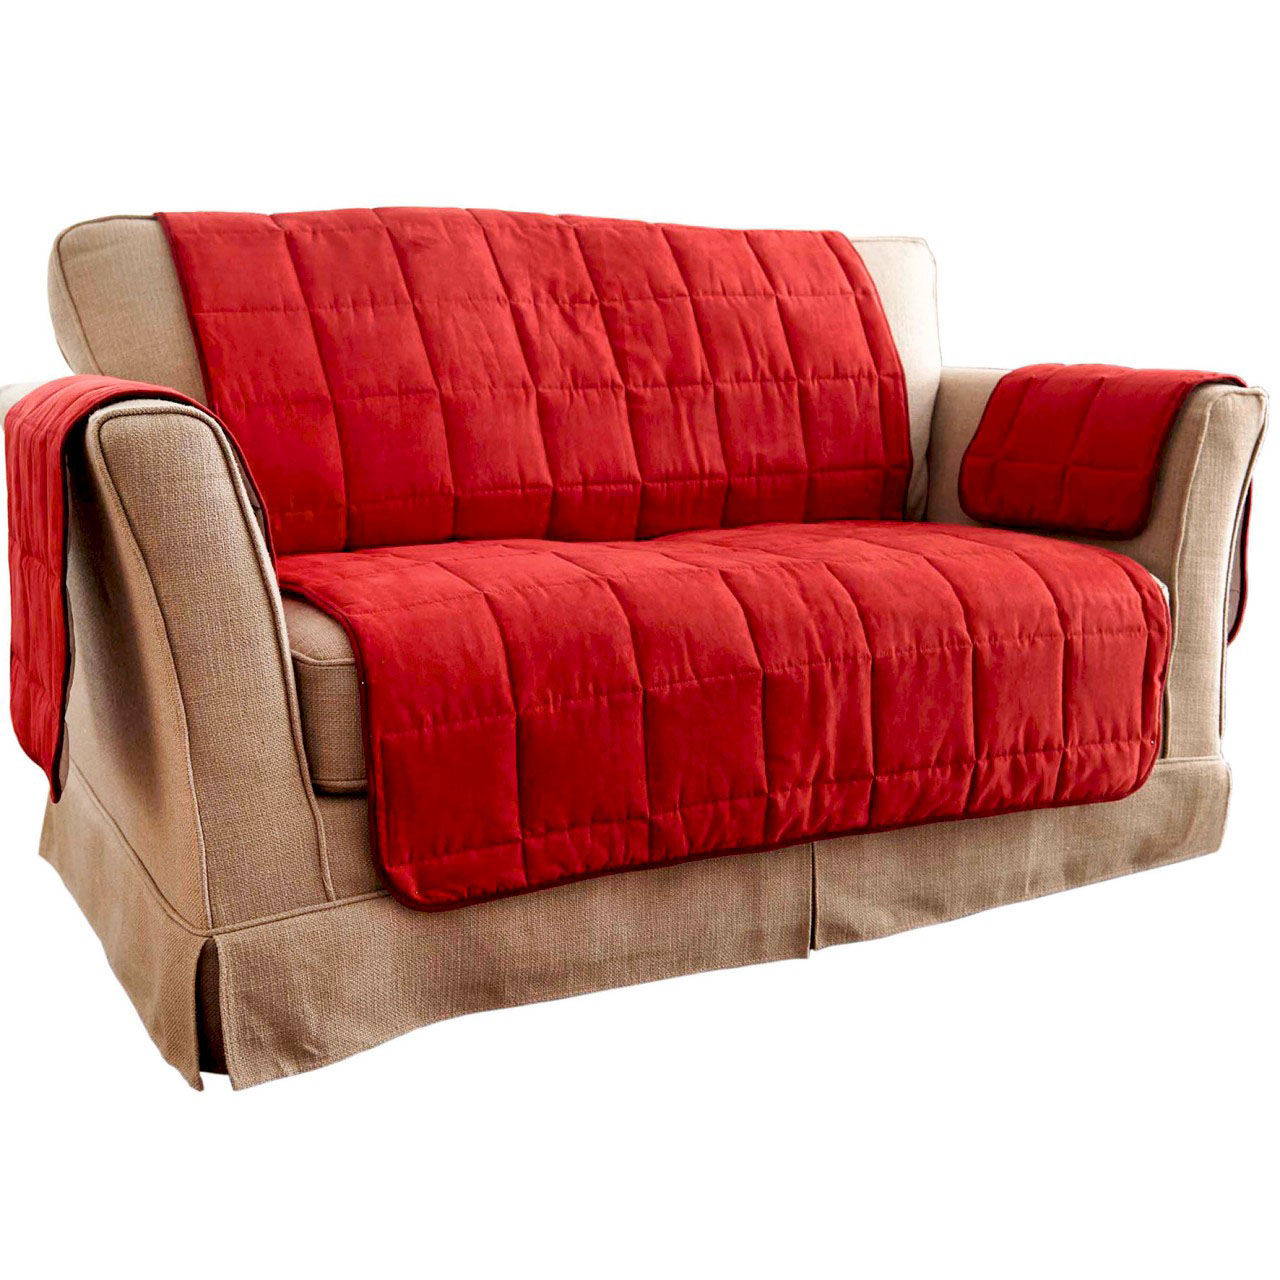 Faux Suede 2-seater Sofa Cover